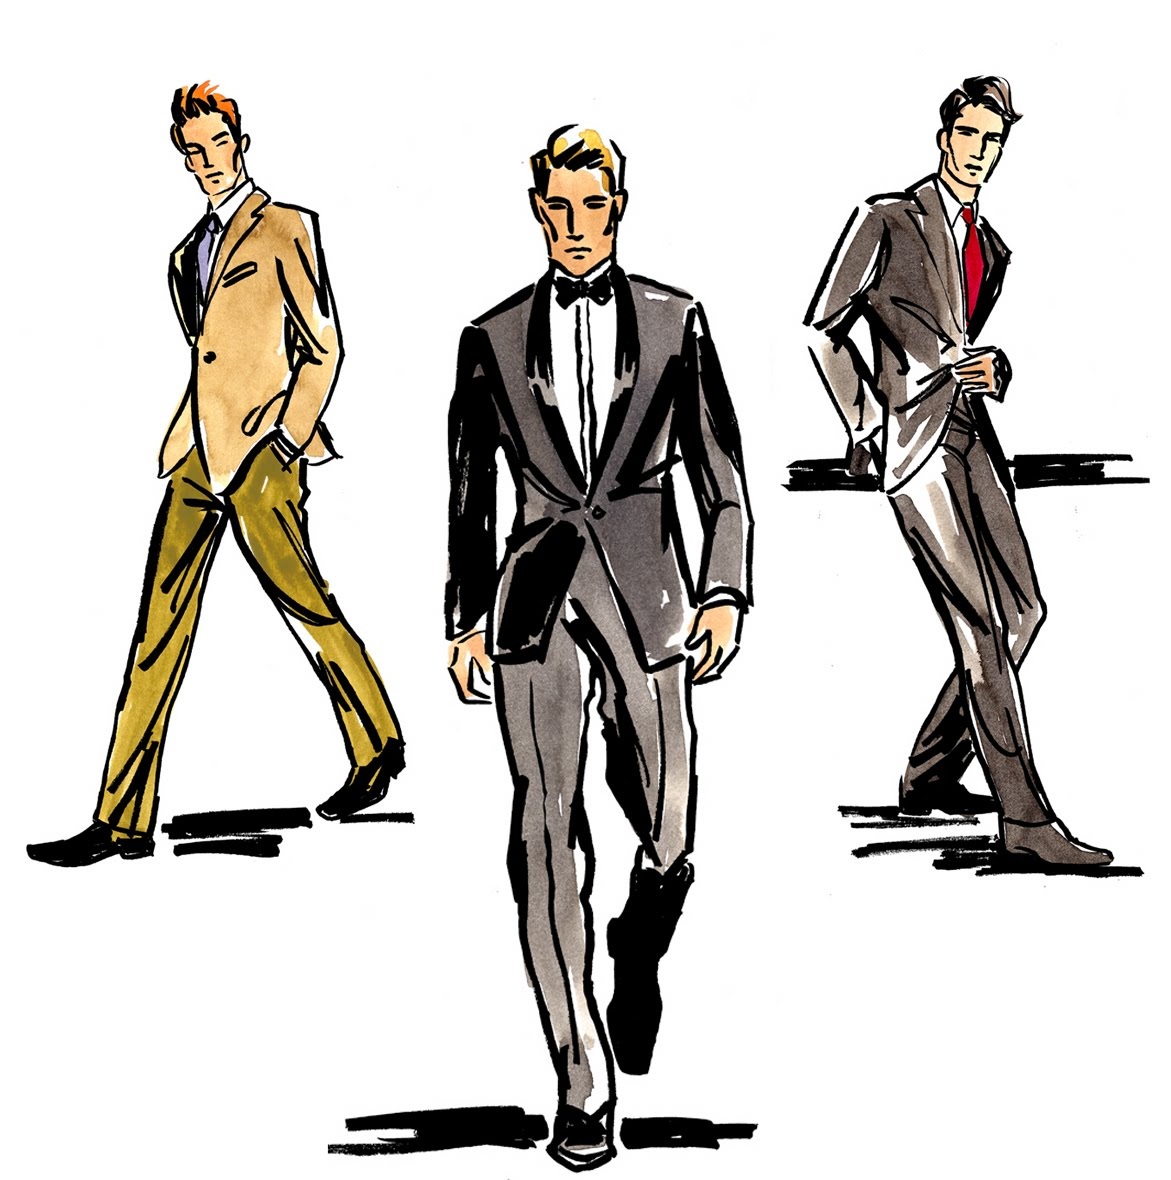 2100 Mens Fashion Sketch Stock Photos Pictures  RoyaltyFree Images   iStock